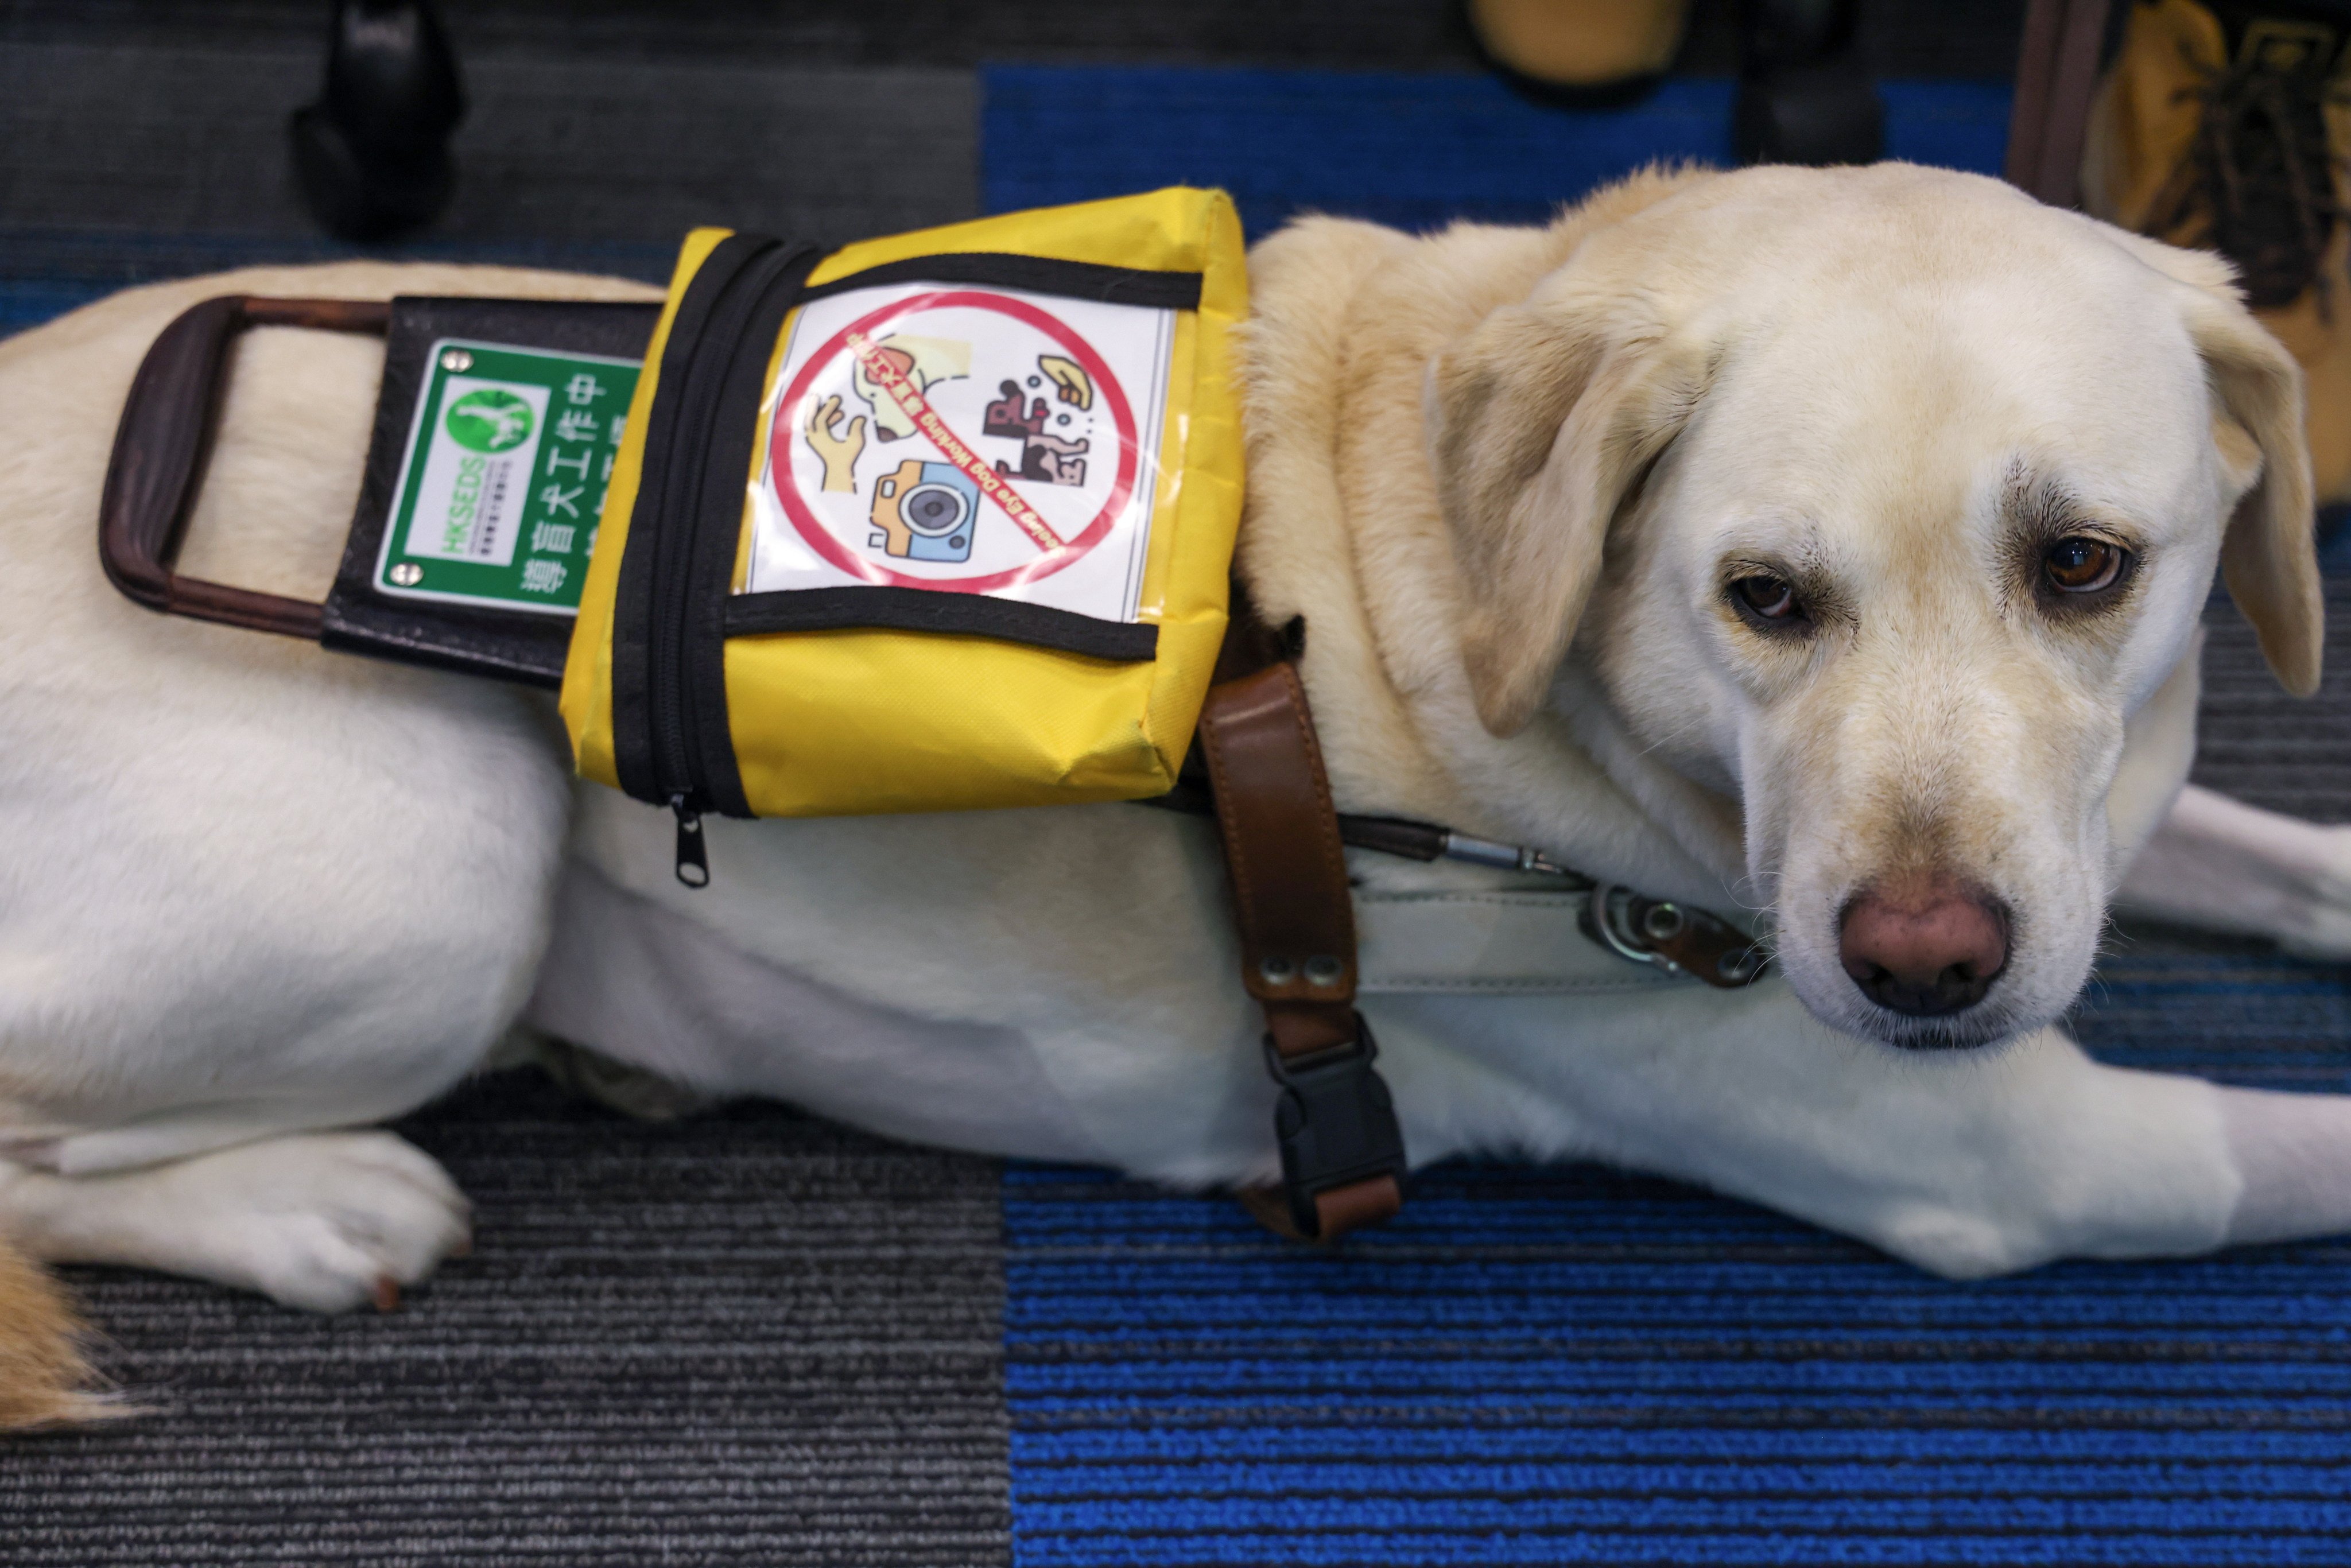 As of April this year, there were more than 50 trained guide dogs in Hong Kong. The animals help perform tasks for people with visual impairments. Photo: Jelly Tse